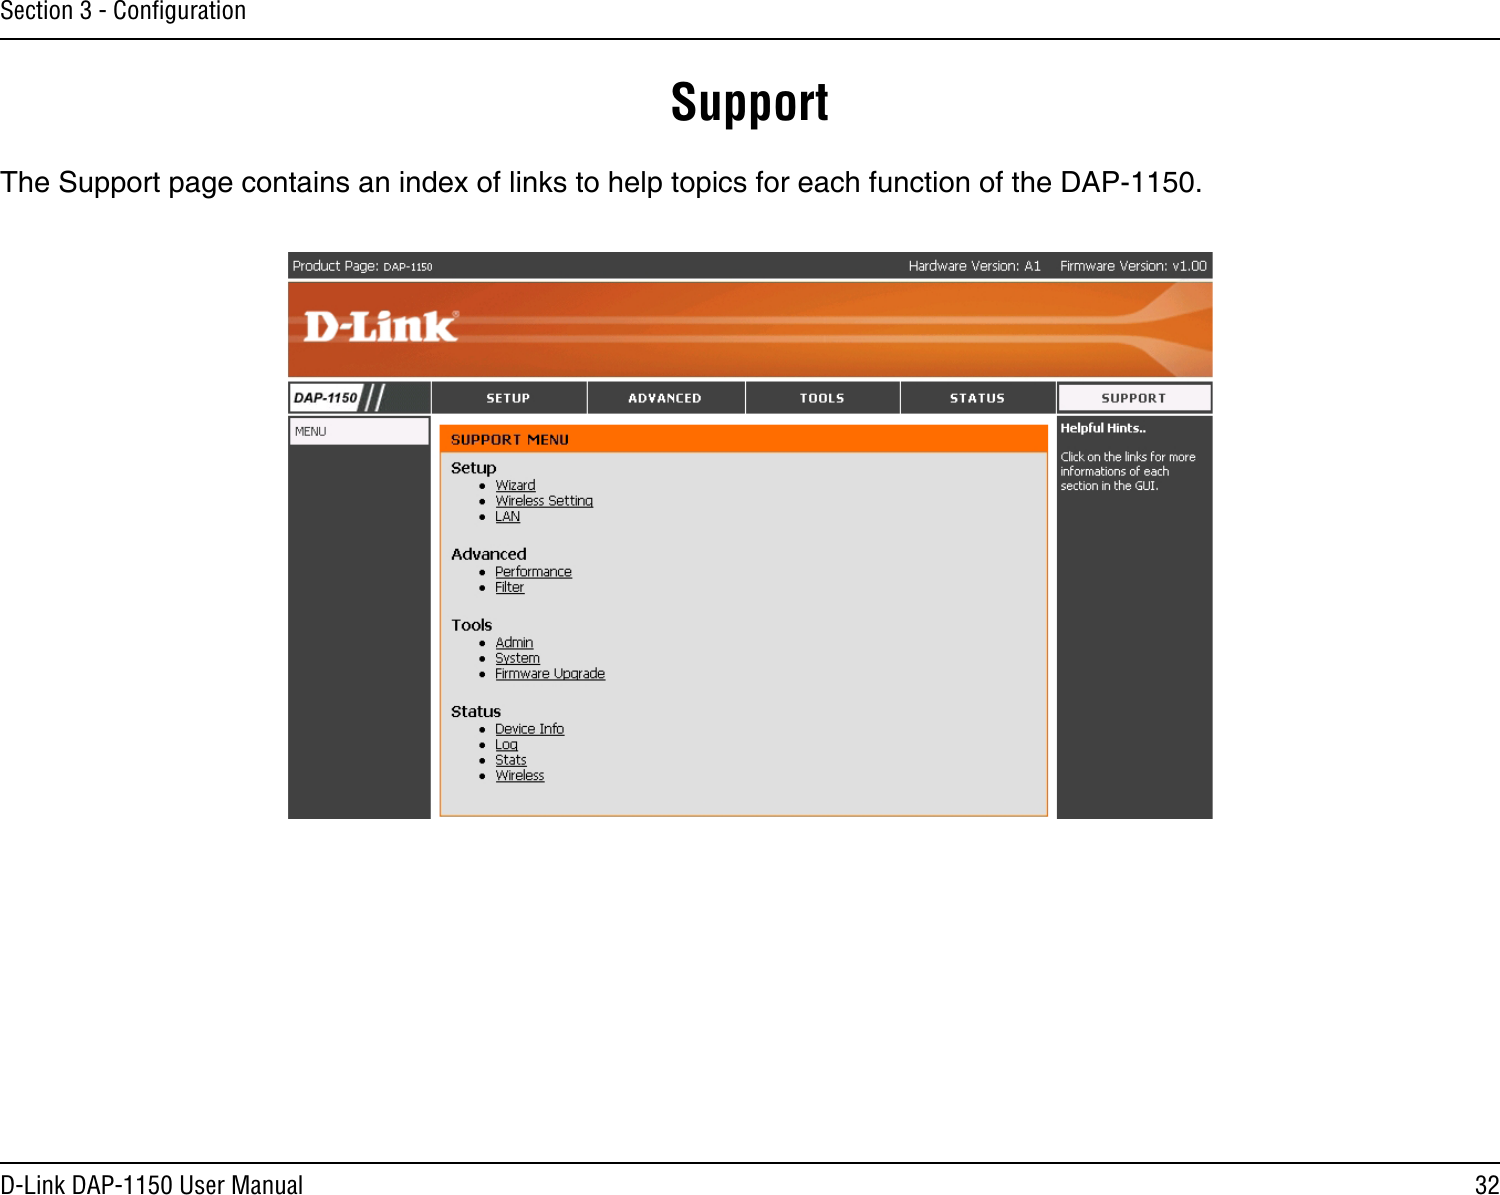 32D-Link DAP-1150 User ManualSection 3 - ConﬁgurationSupportThe Support page contains an index of links to help topics for each function of the DAP-1150.